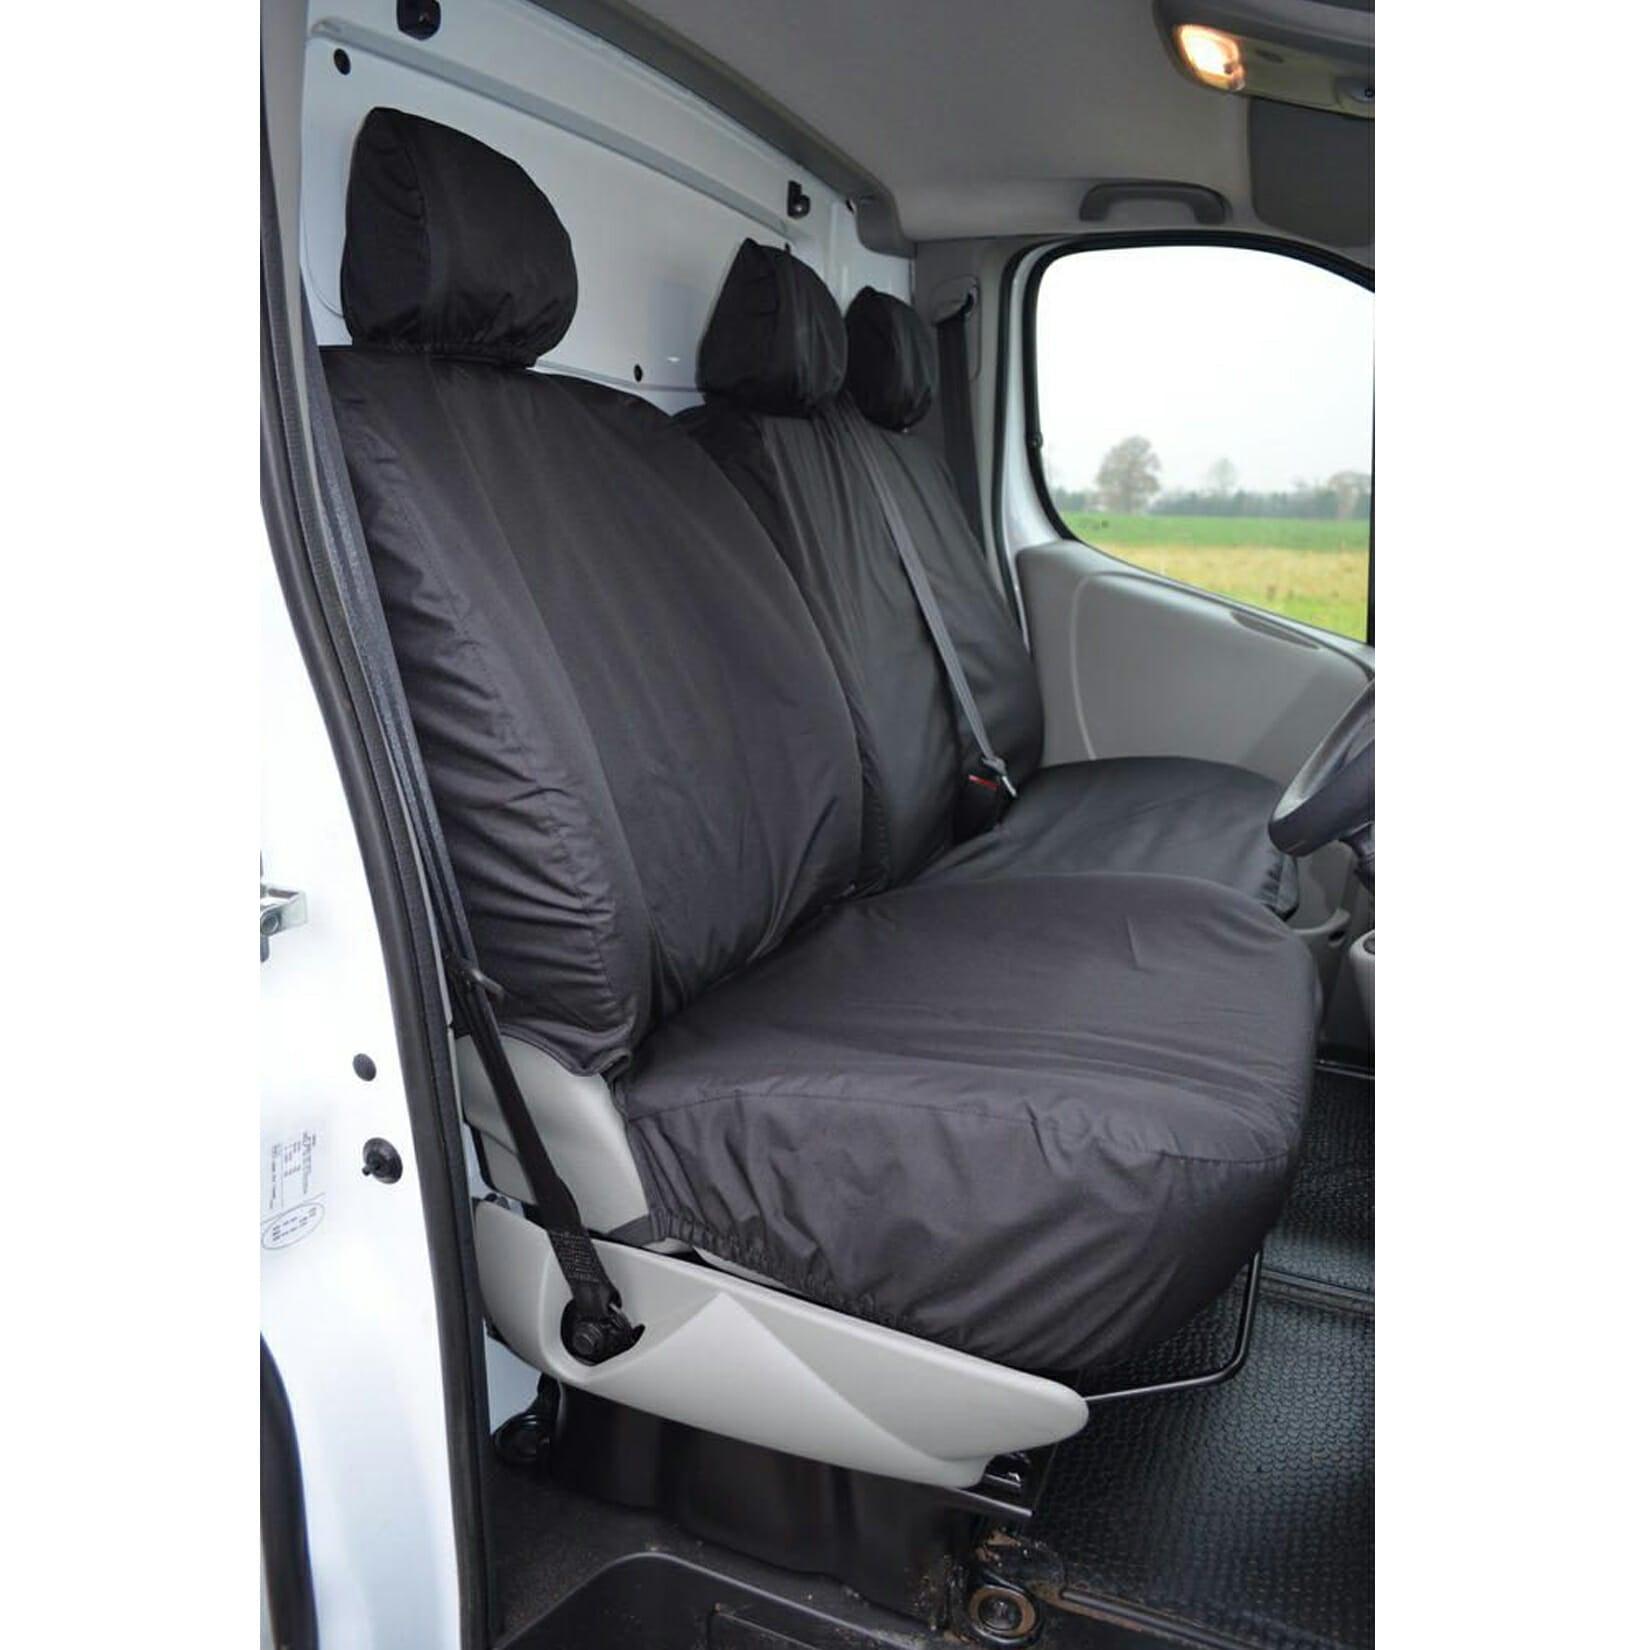 RENAULT TRAFIC - VAUXHALL VIVARO - 2006-2014 - DRIVER AND DOUBLE PASSENGER SEAT COVERS - BLACK - Storm Xccessories2